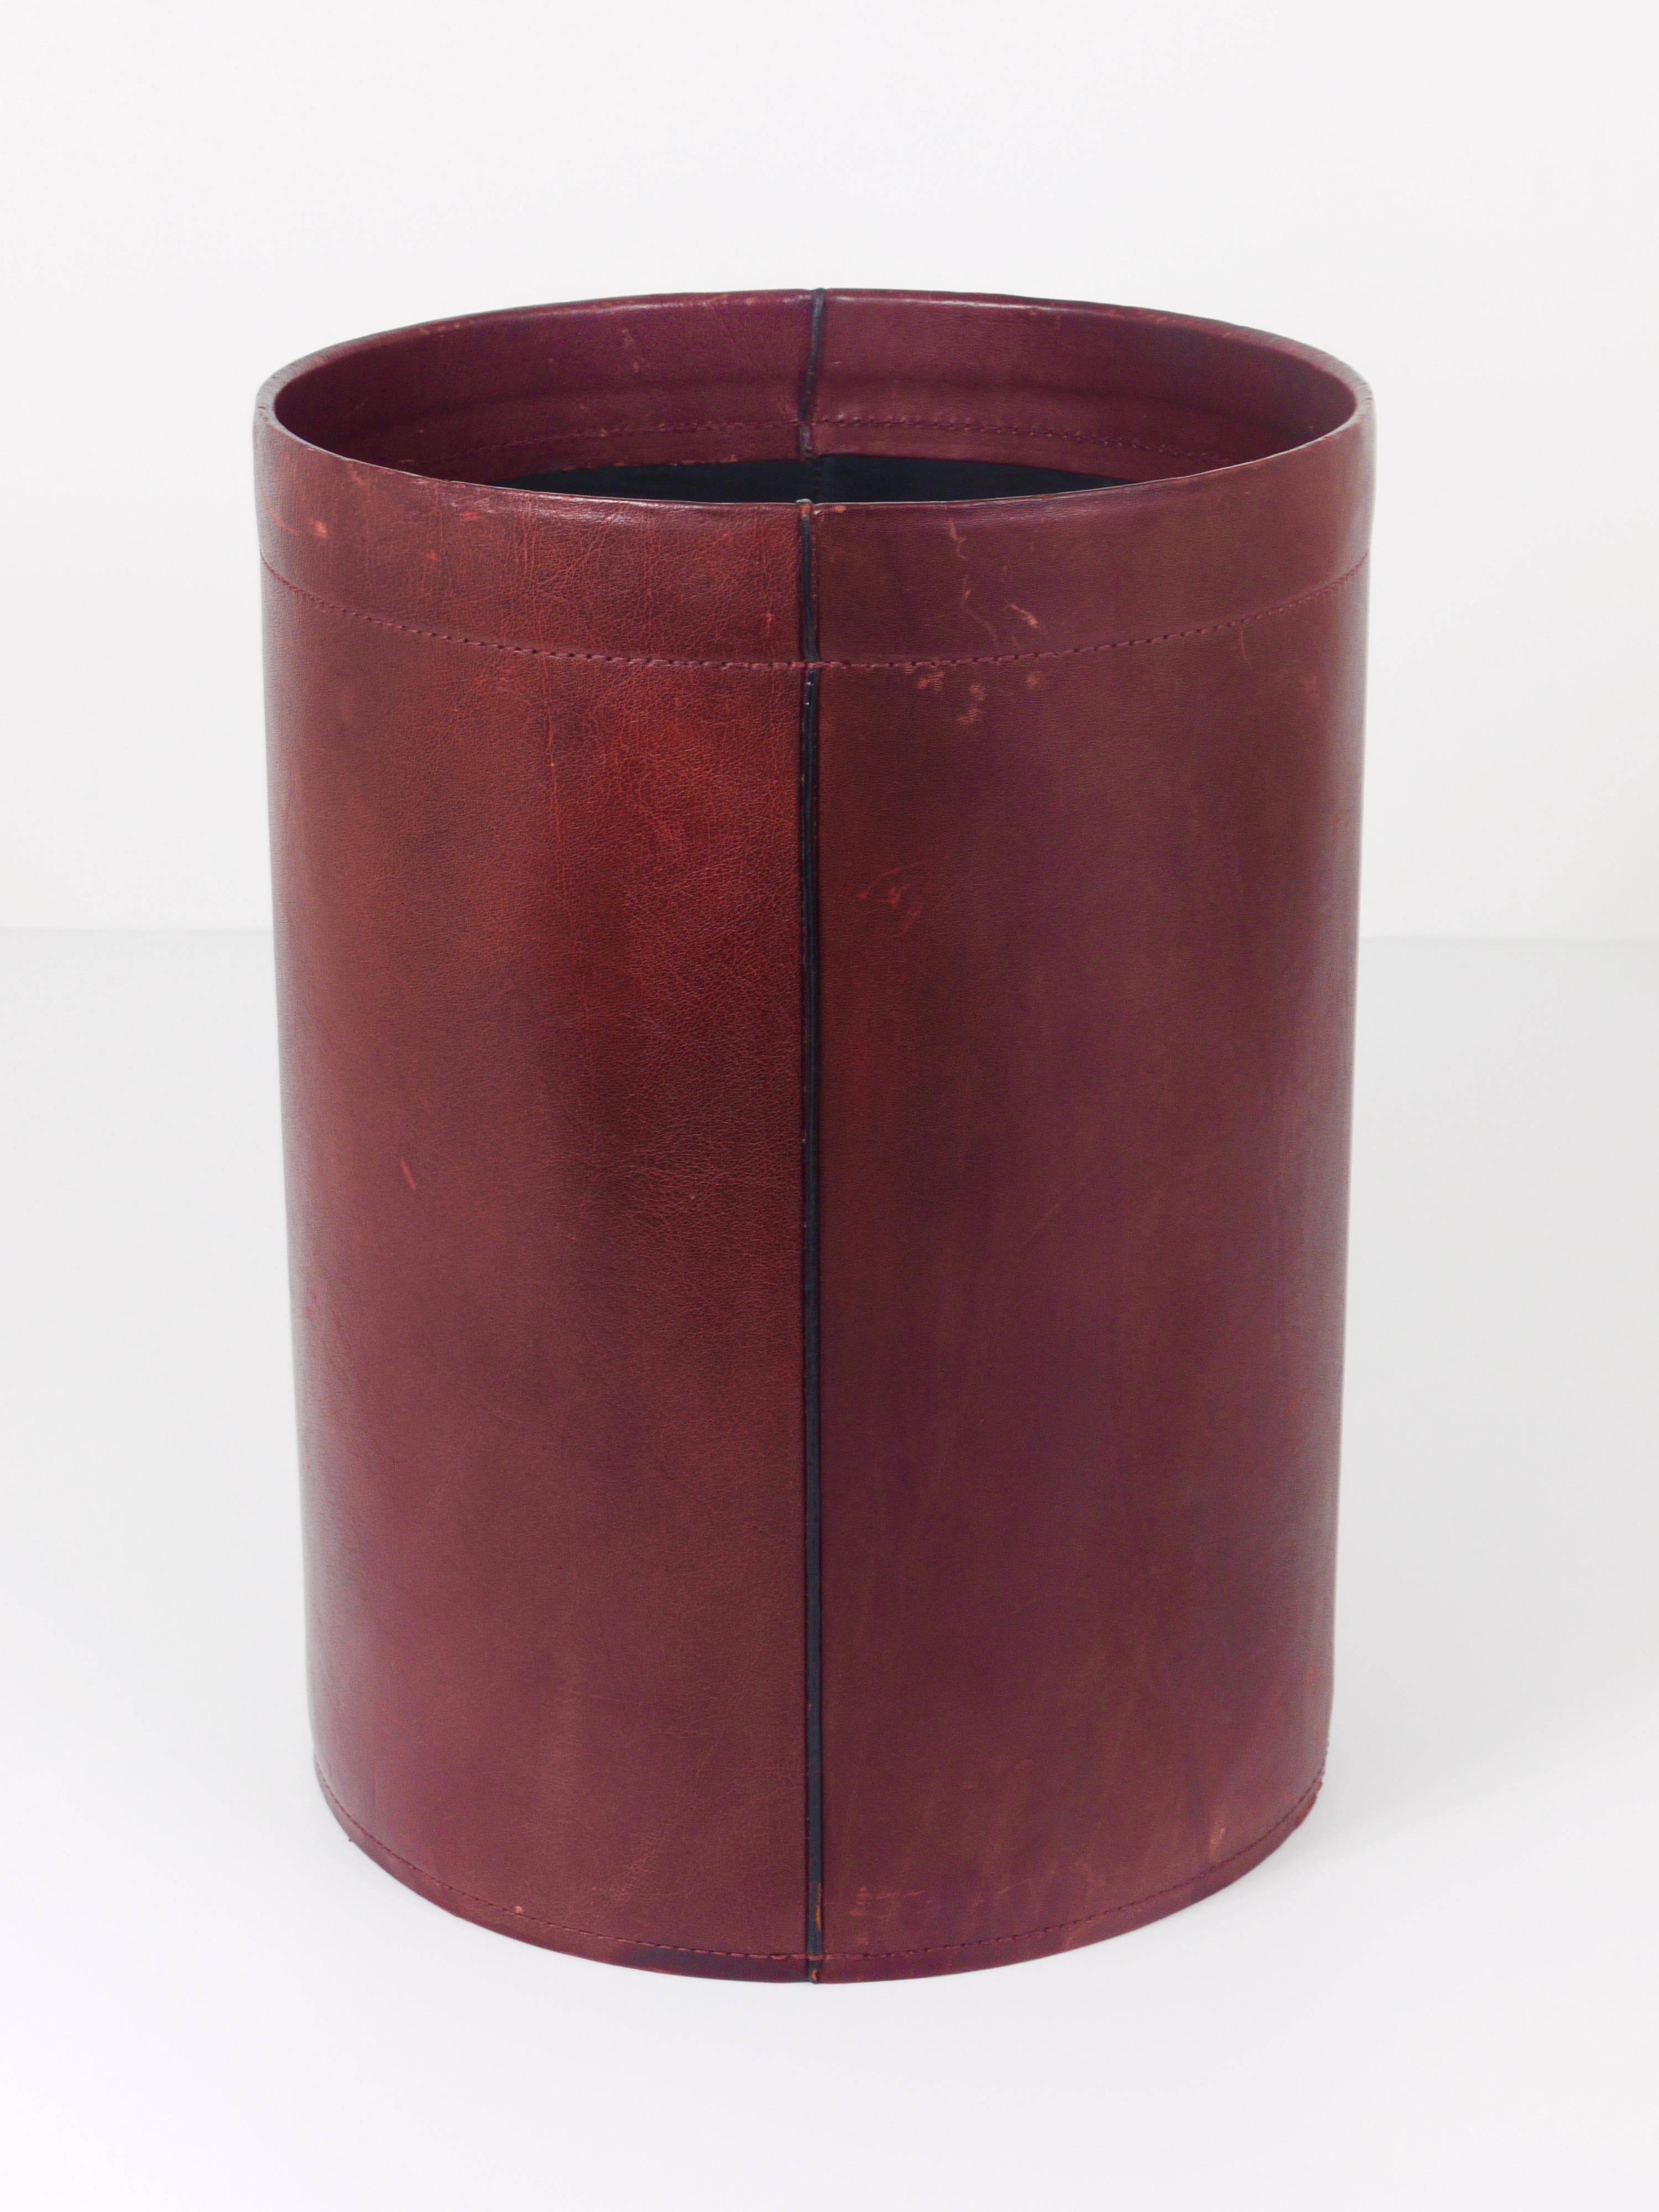 A beautiful and elegant, vintage Mid-Century Modern paper basket / paper bin from the 1970s. Handmade and hand-sewn from bordeaux red / brown leather, with a black leather interior. In good condition with nice patina on the leather. Diameter 10